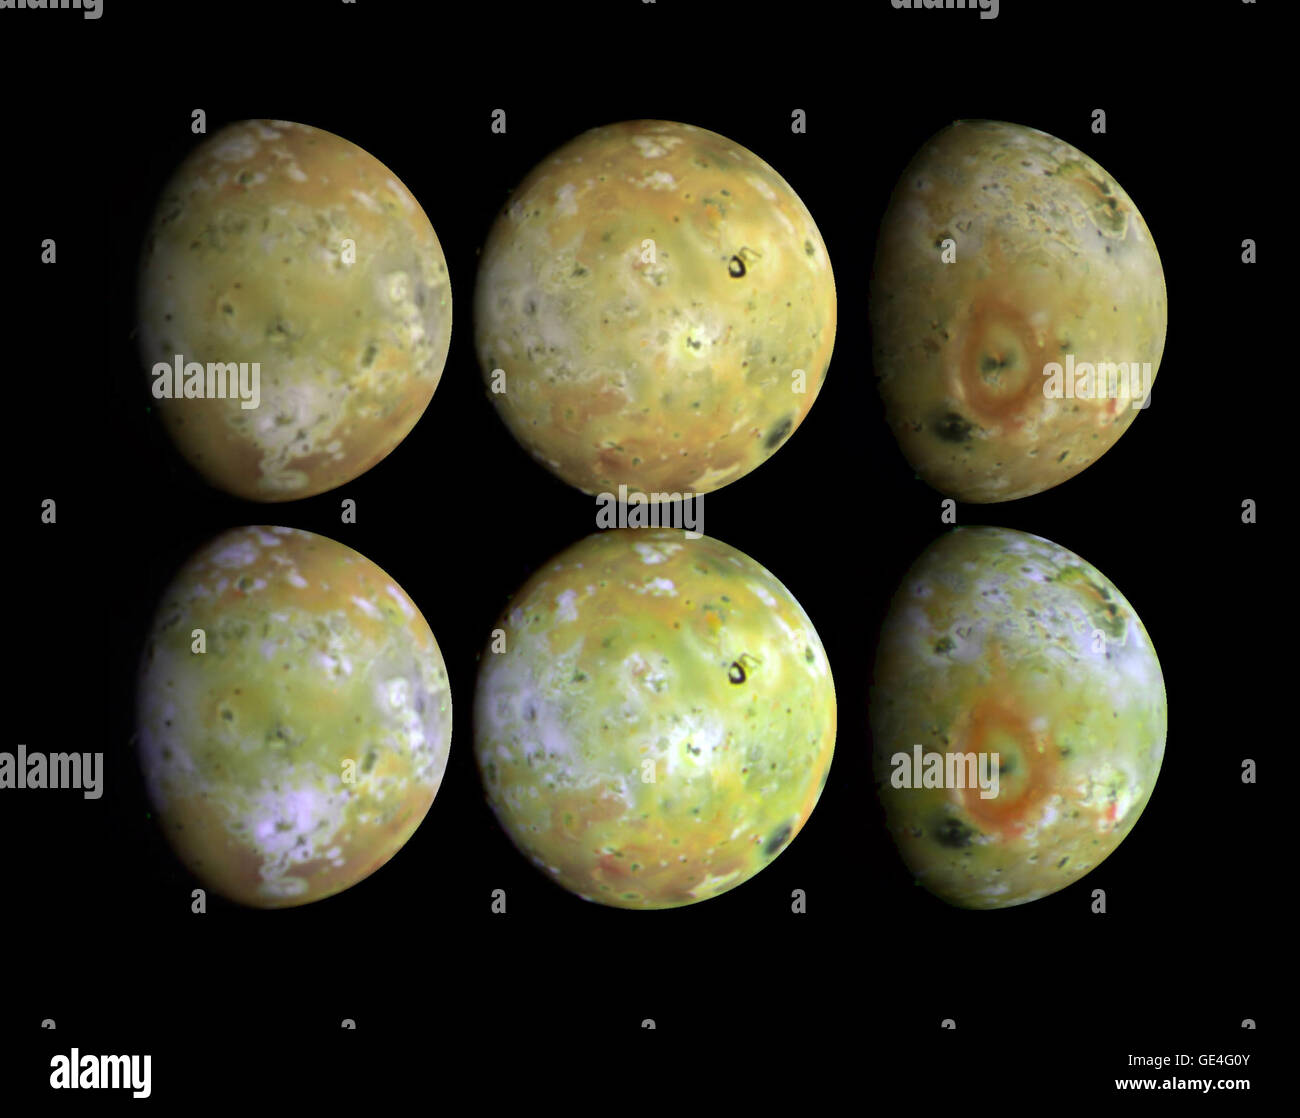 (September 24, 1996) Three views of the full disk of Jupiter's volcanic moon, Io, each shown in natural and enhanced color. These three views, taken by Galileo in late June 1996, show about 75 percent of Io's surface. North is up. The top disks are intended to show the satellite in natural color (but colors will vary with display devices) while the bottom disks show enhanced color (near-infrared, green, and violet filtered images) to highlight details of the surface. These images reveal that some areas on Io are truly red, whereas much of the surface is yellow or light greenish. (Accurate natu Stock Photo